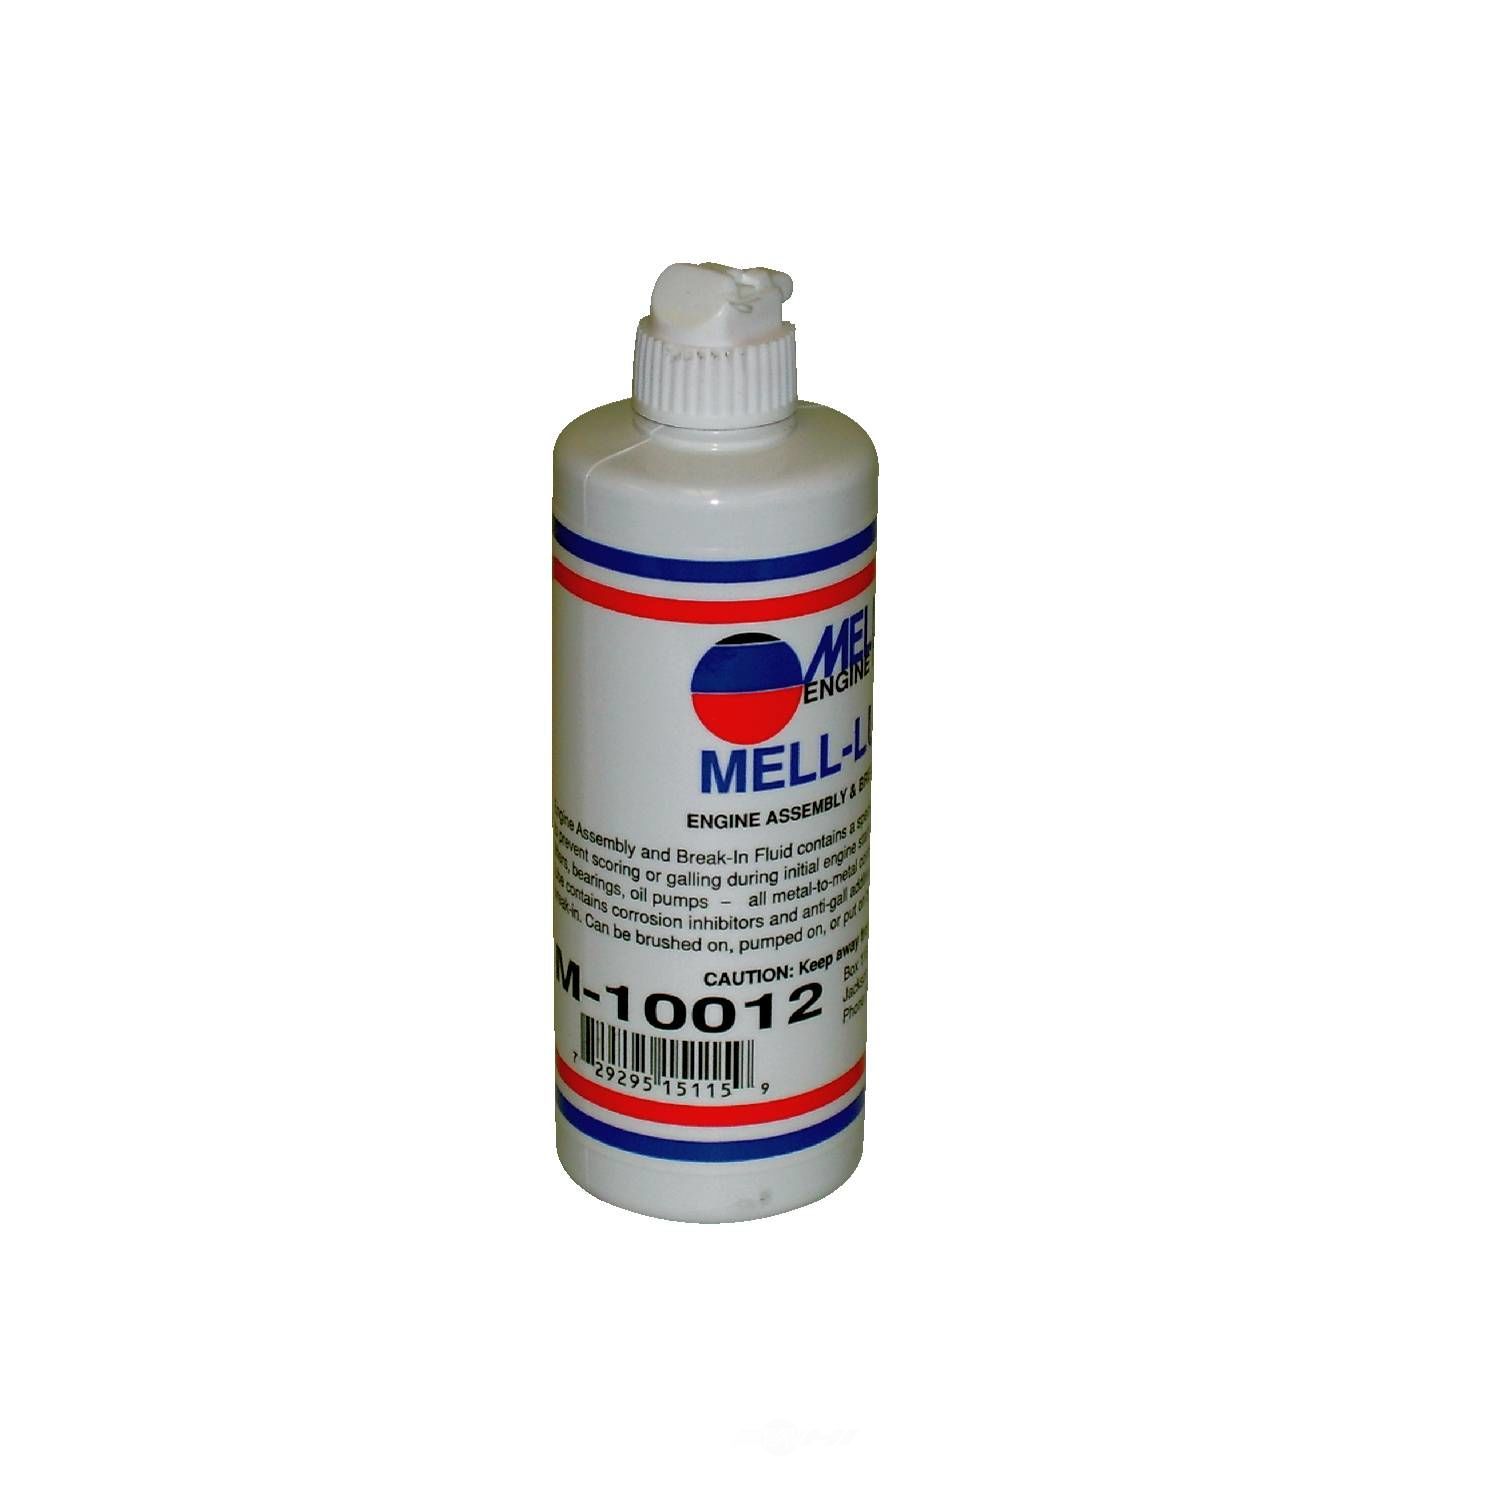 MELLING - Stock Assembly Lube - MEL M-10012